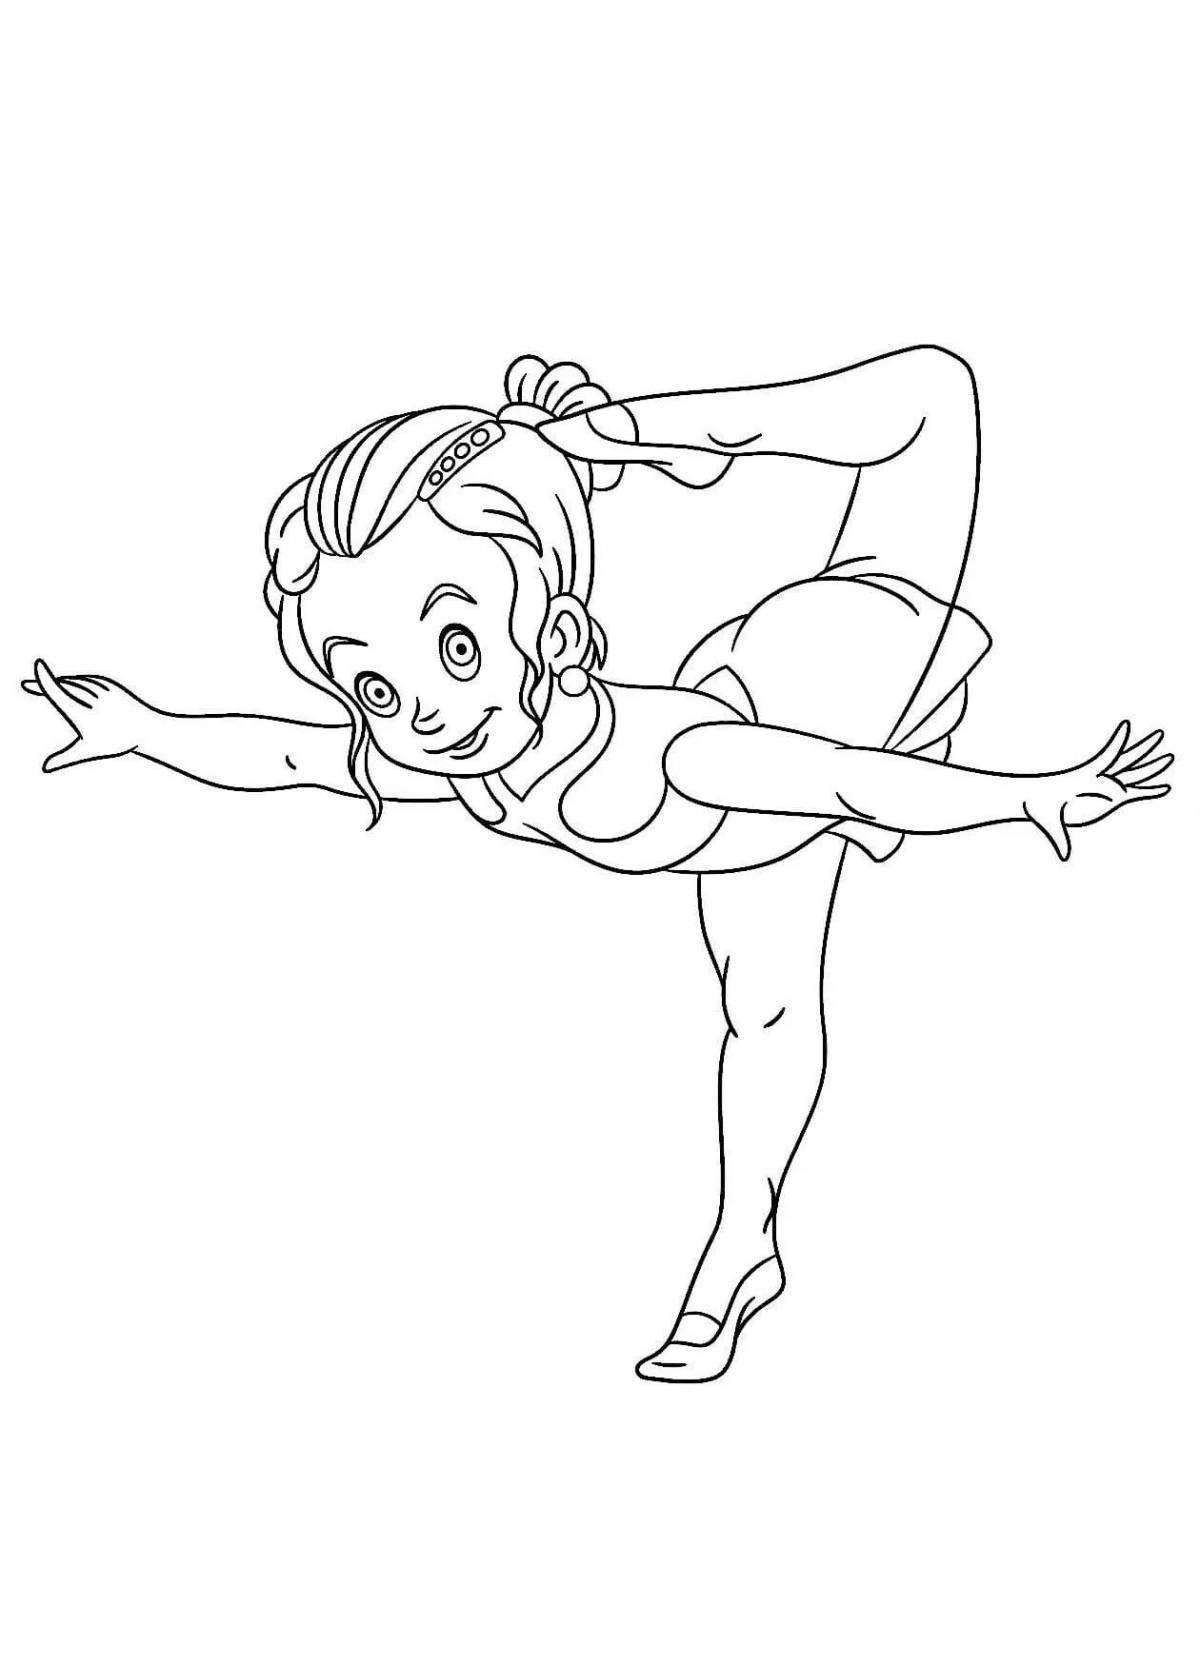 Colorful gymnast coloring book for kids